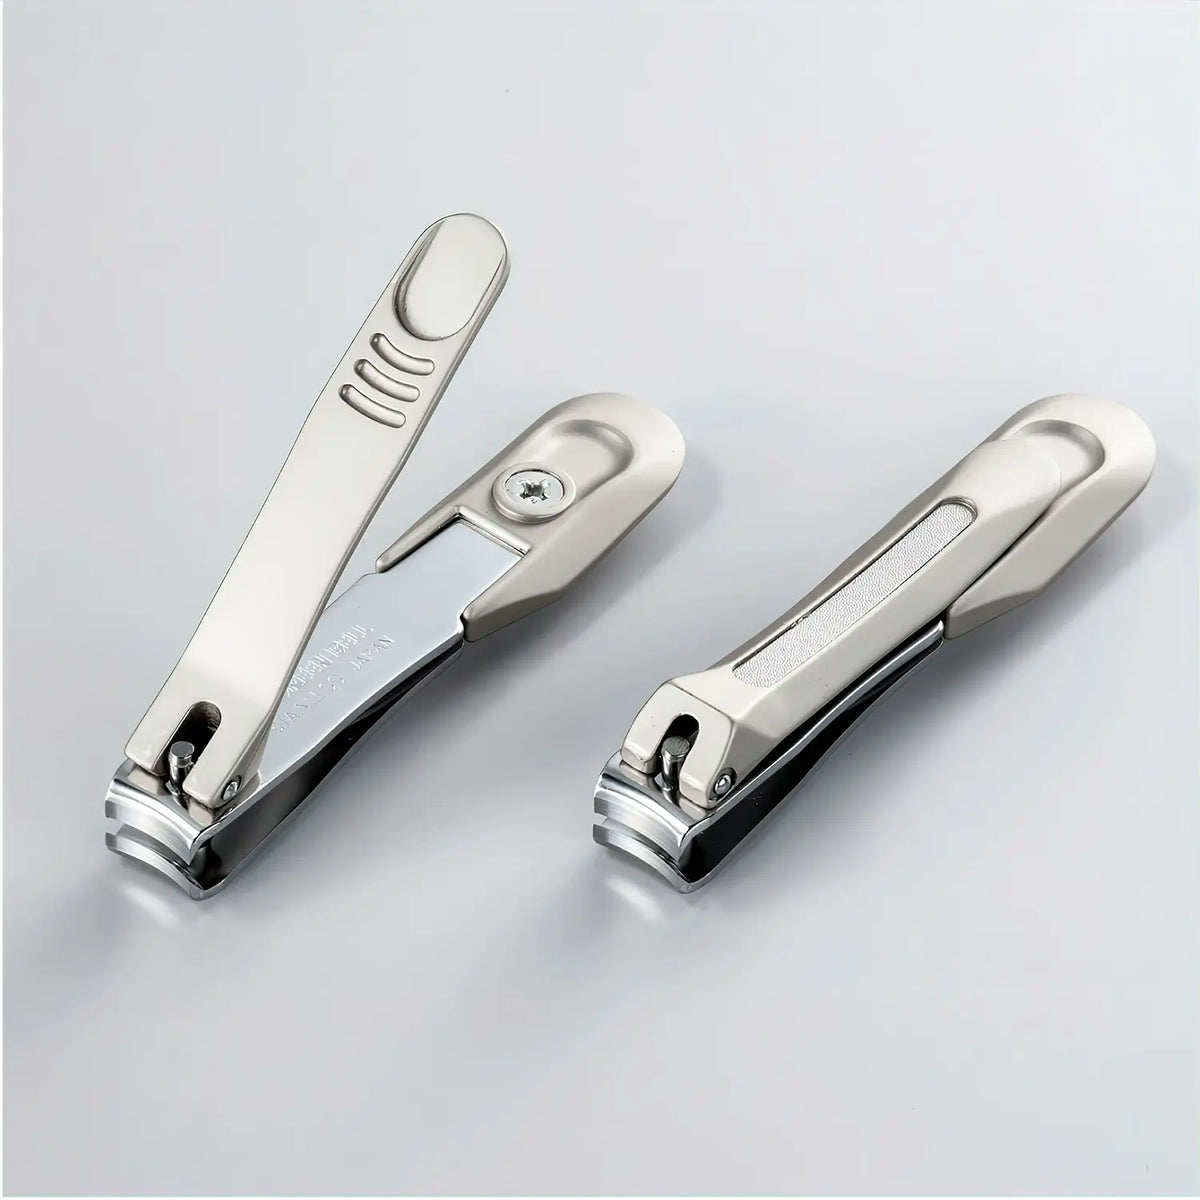 Buy Pretty Claw | Nail Clipper Straight Edge Finger Toe Nail Cutter Nail  Trimmer Stainless Steel Online at Low Prices in India - Amazon.in